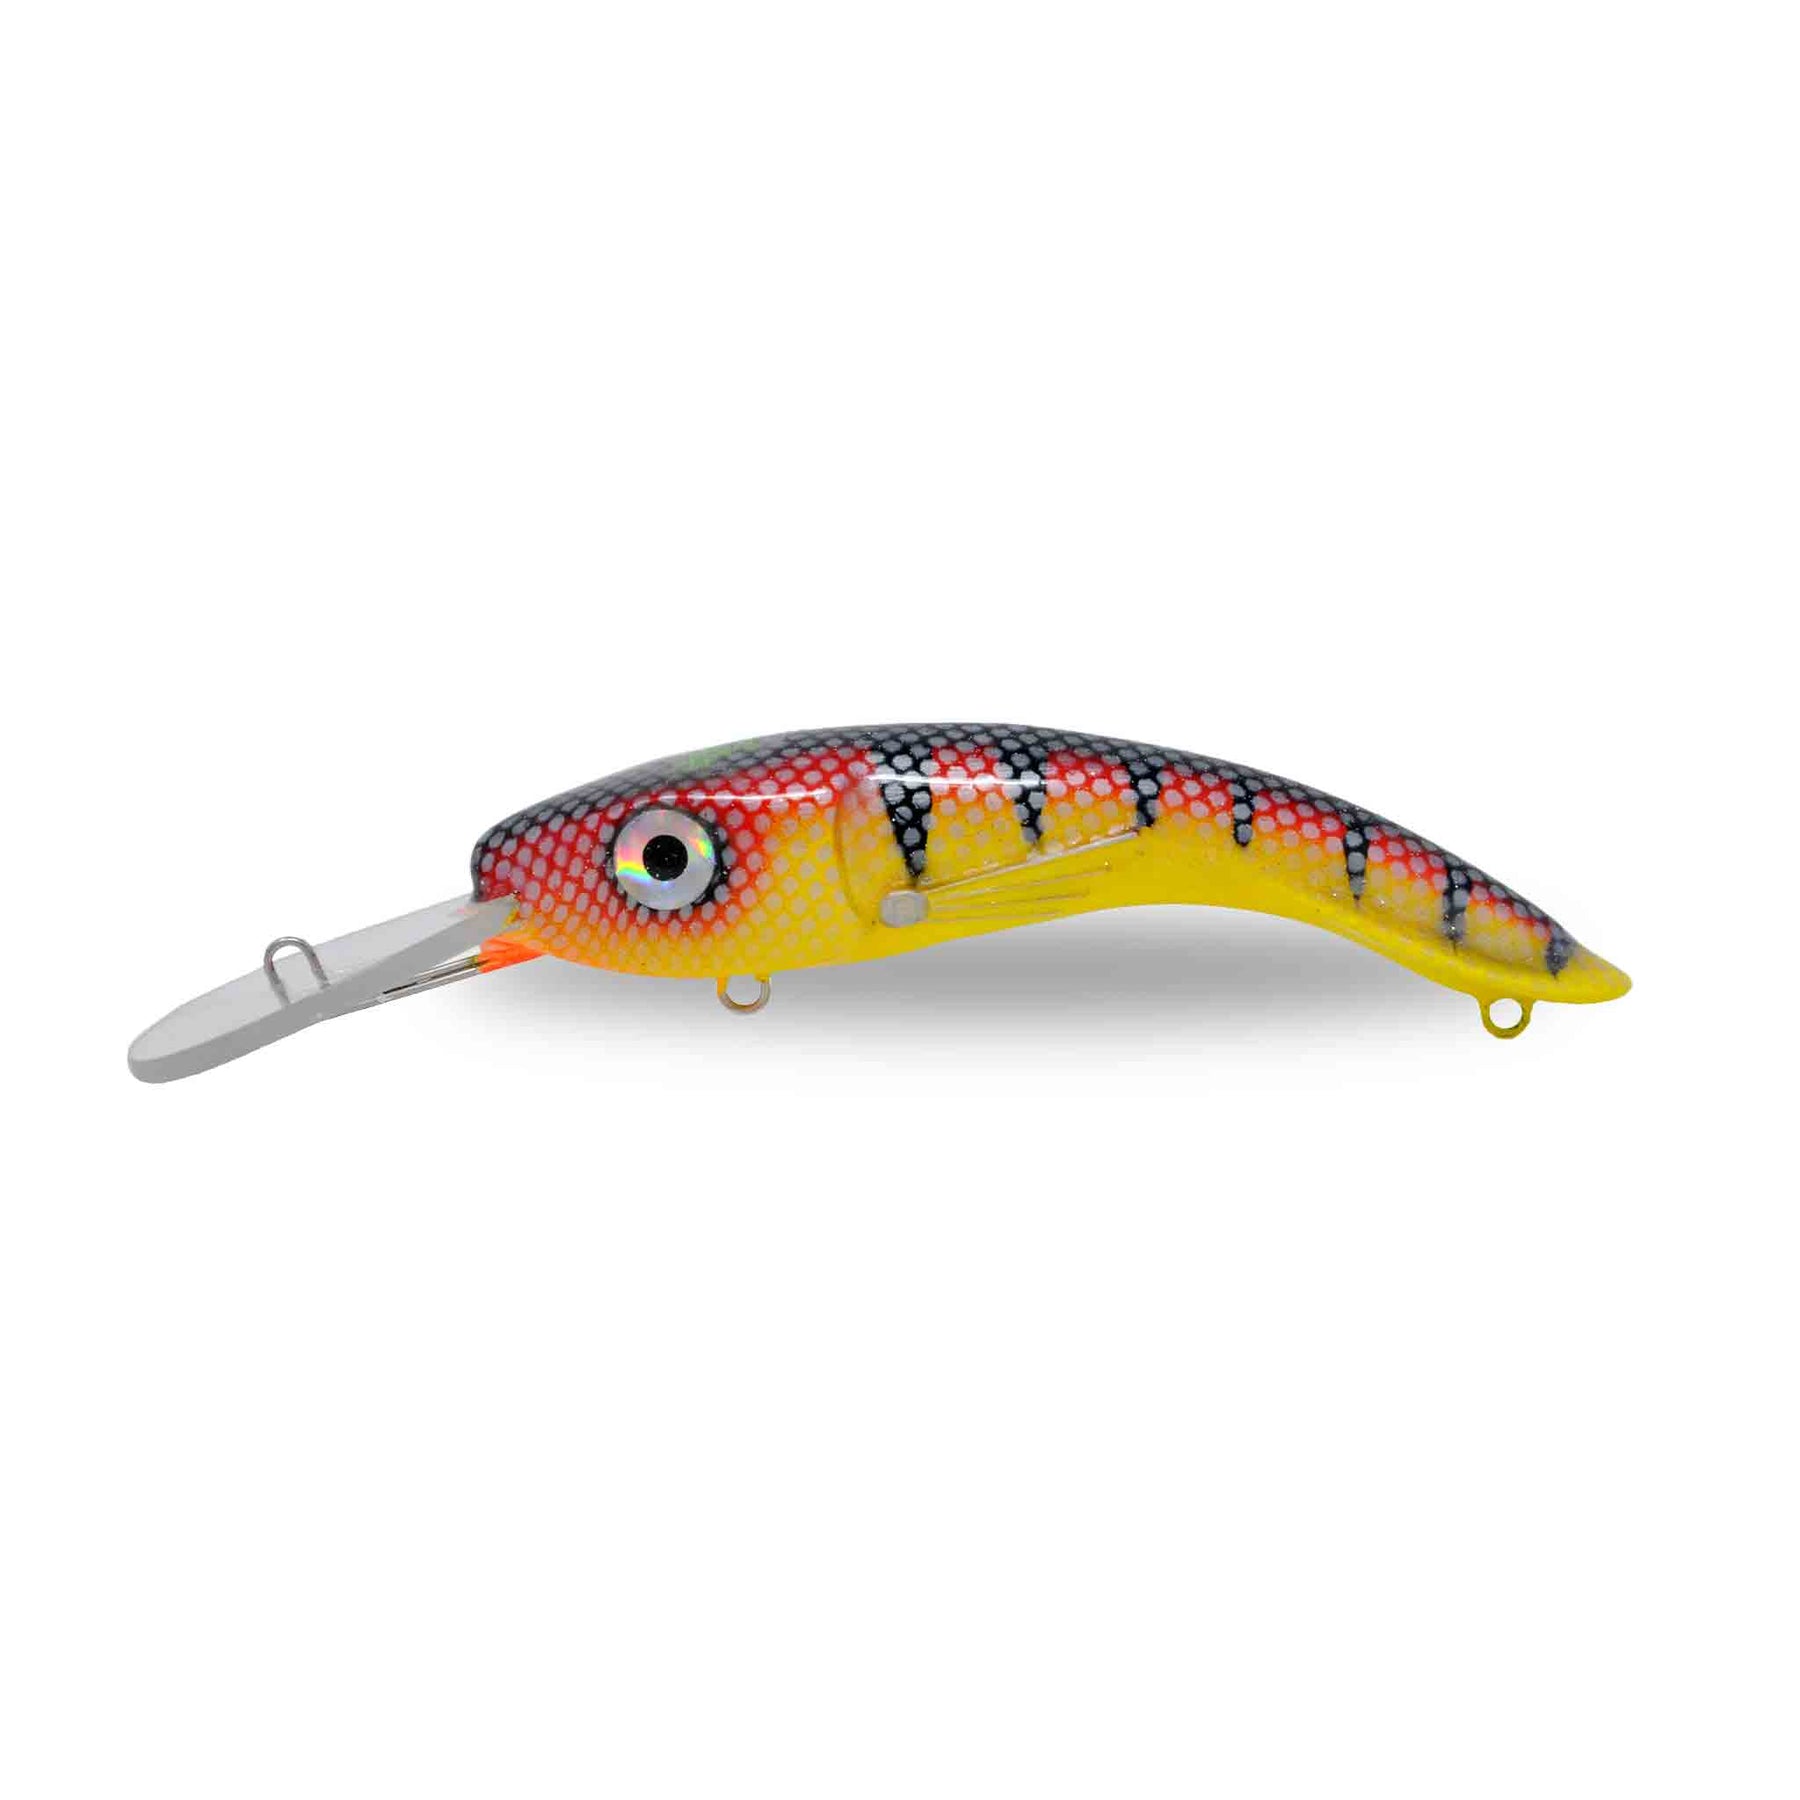 Heavy Tackle - 12 inch, 13 inch, 14 inch, 16 inch 18 inch lures